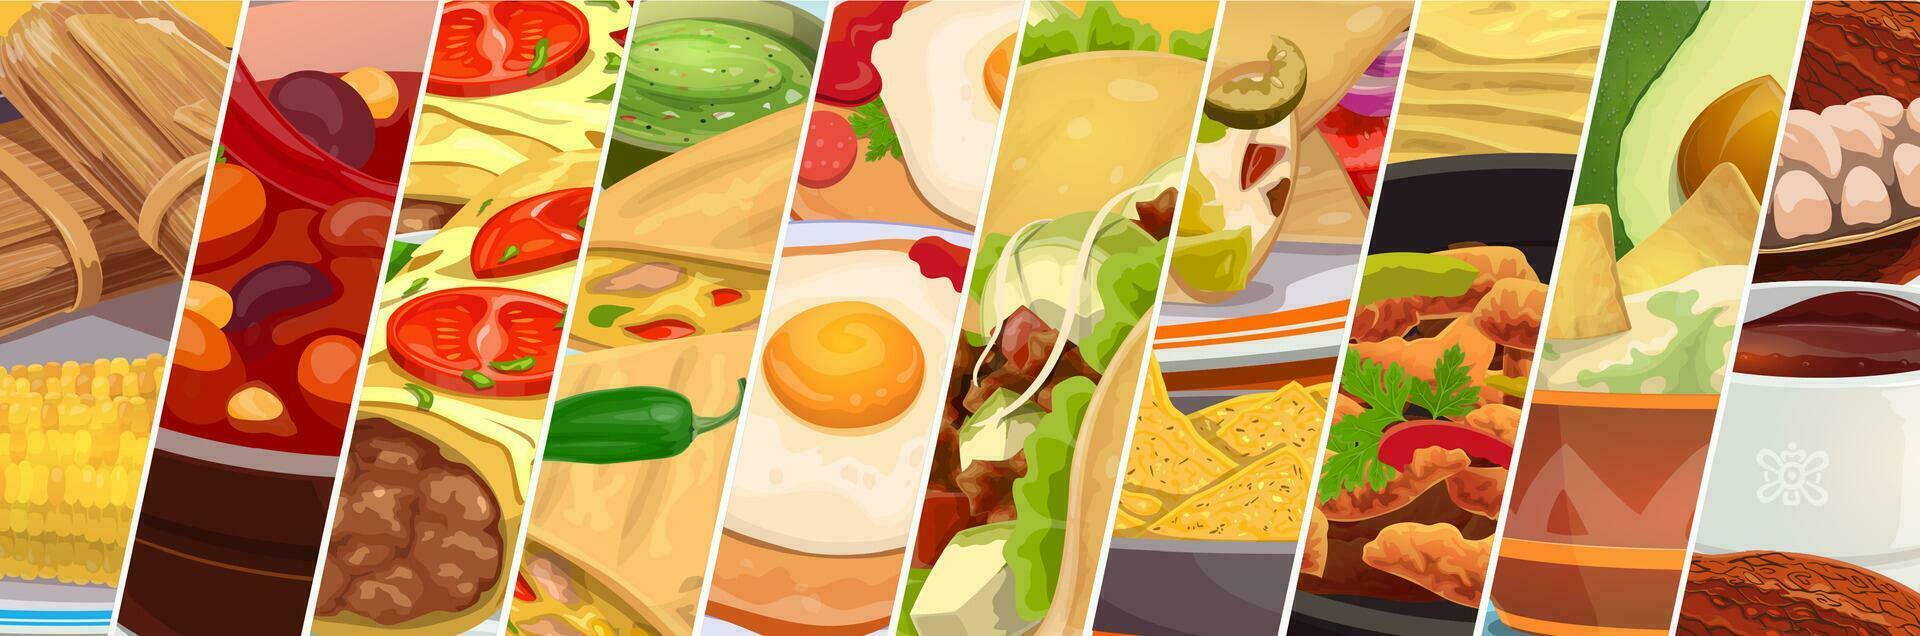 Tex mex mexican cuisine food collage, Mexico meal vector